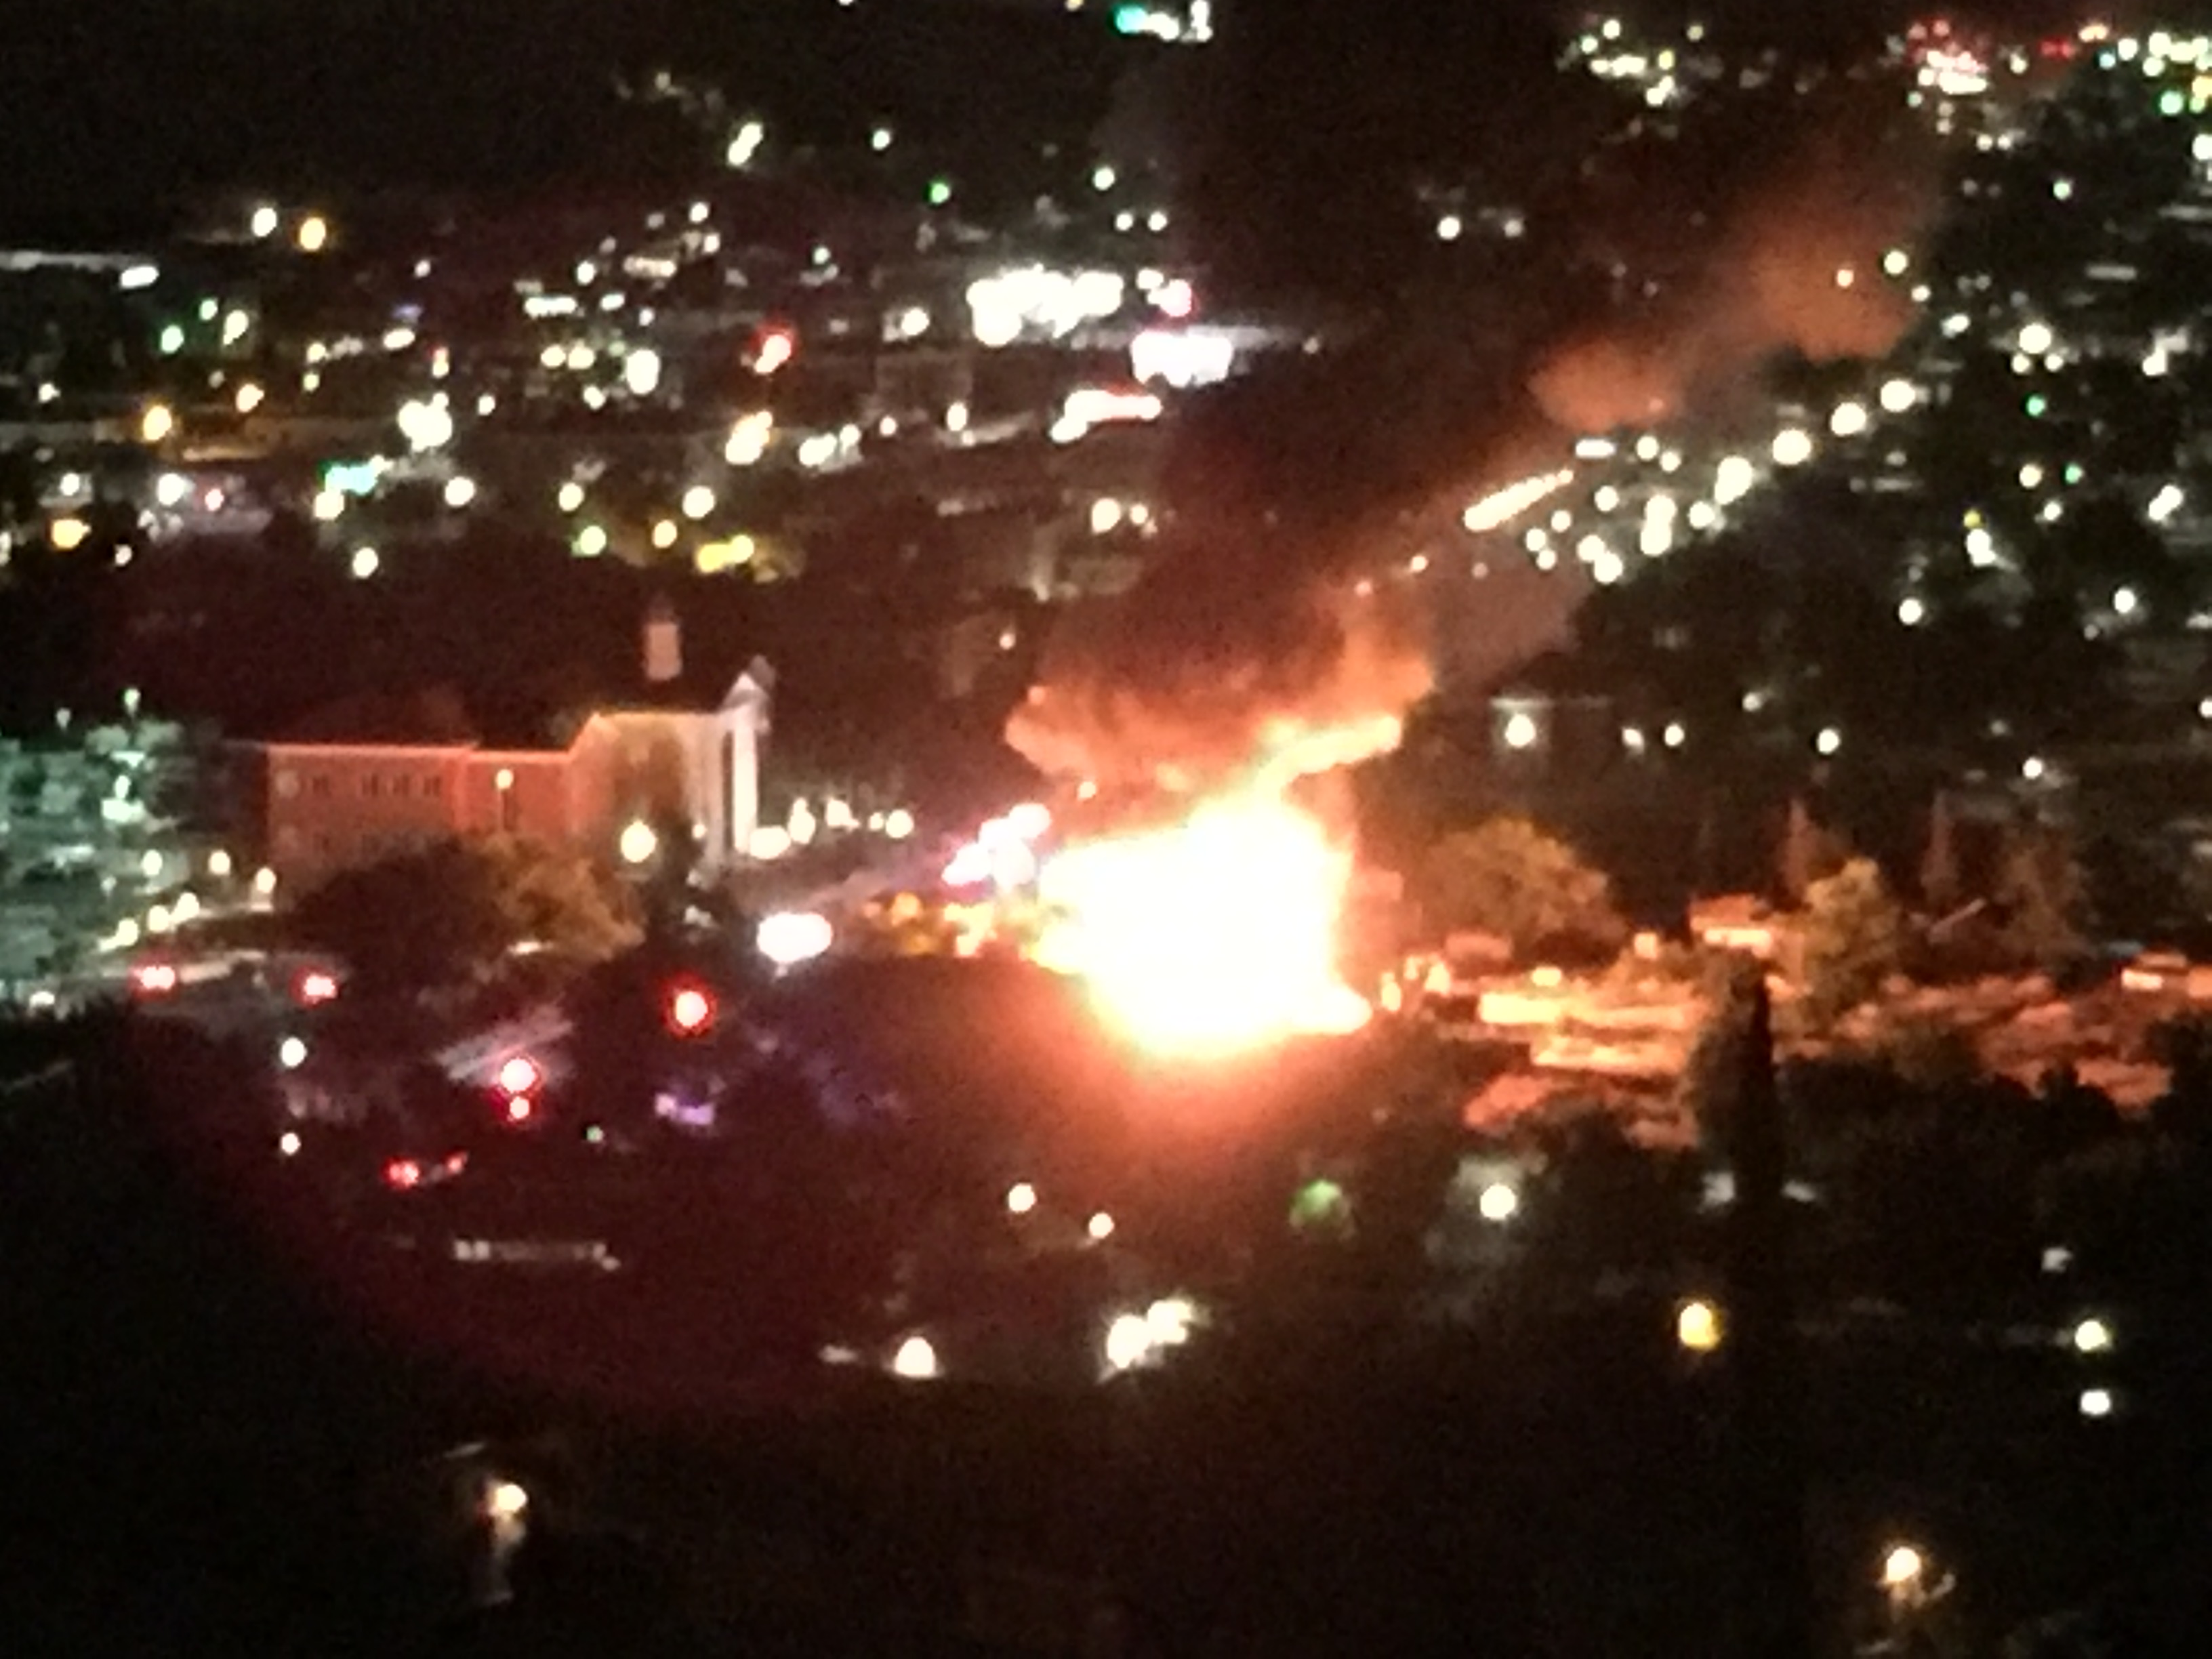 Old Wilkinson's House of Lighting building in St. George fully engulfed in flames